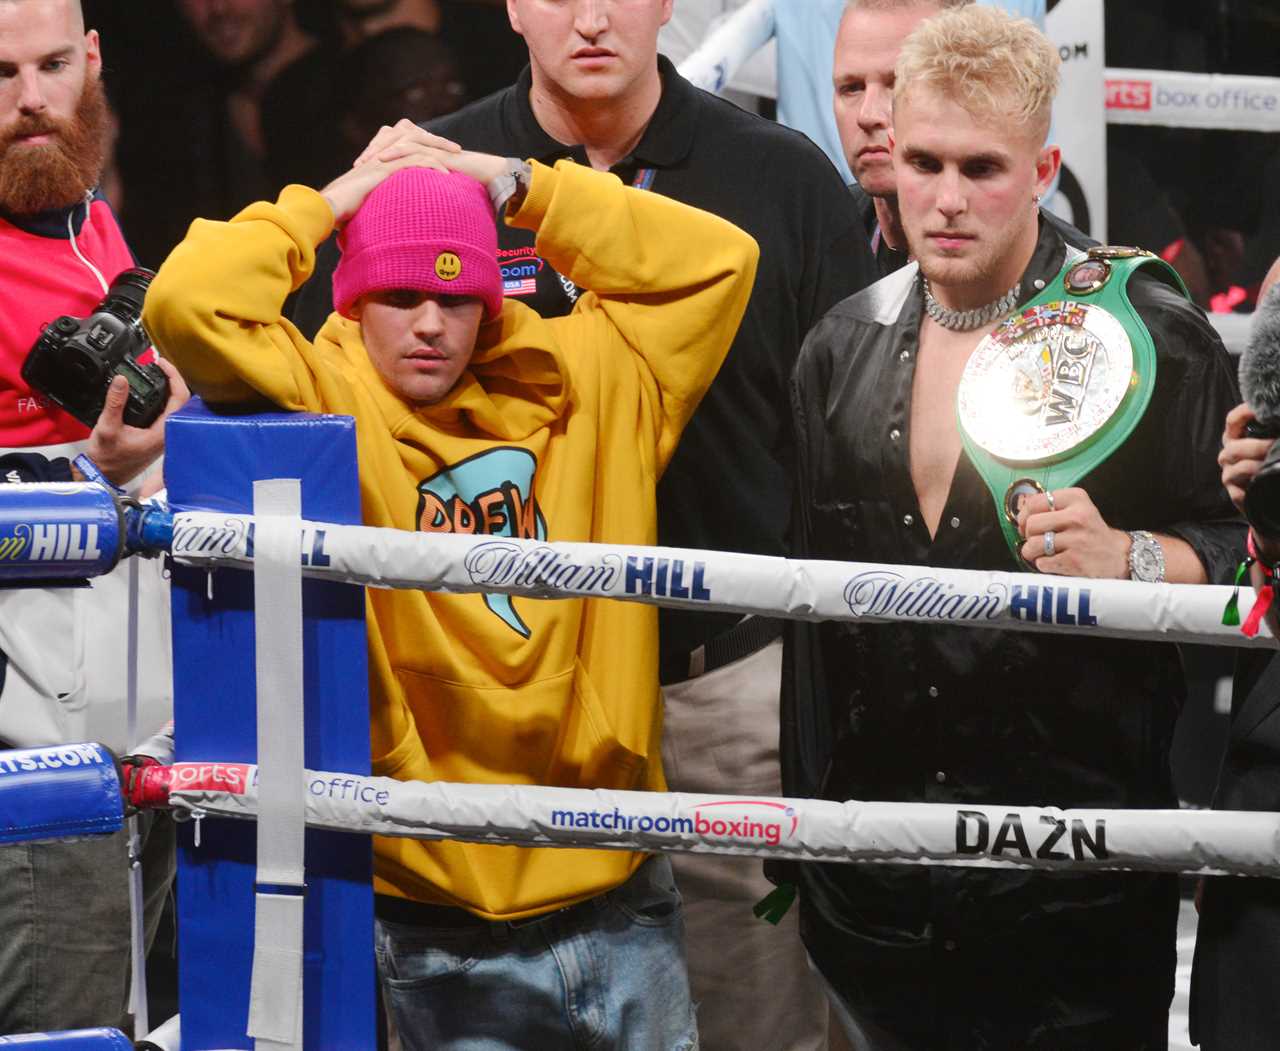 Justin Bieber is now taking secret boxing lessons. He can become 'next Jake Paul’ after he fights Tom Cruise.